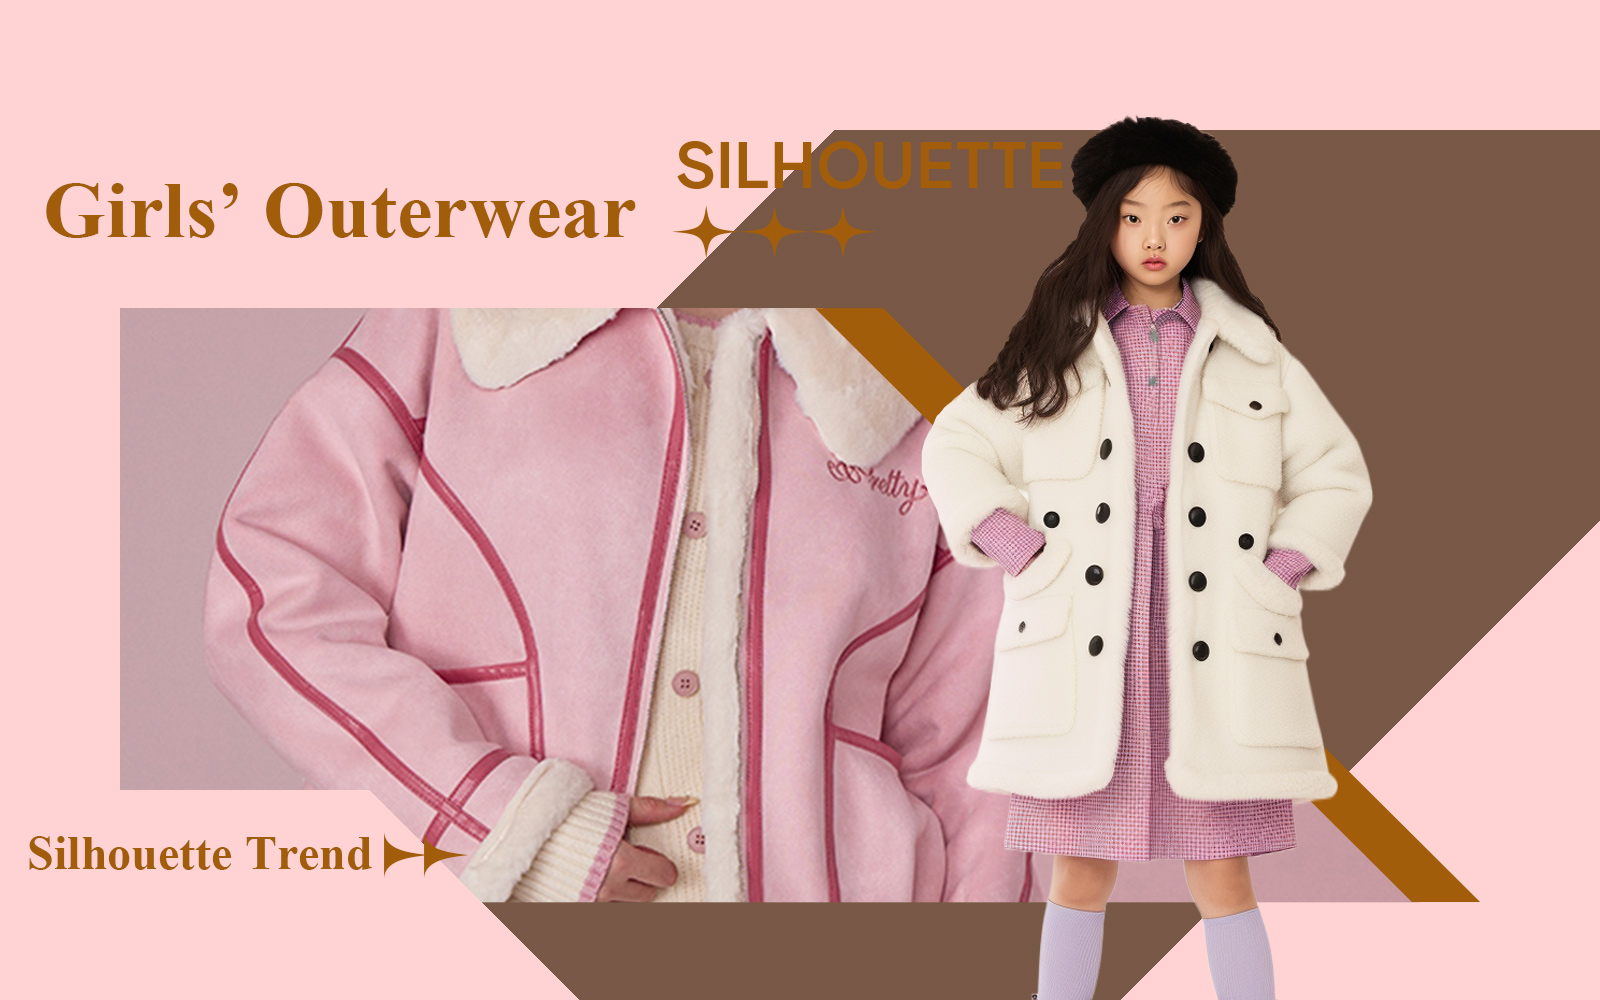 A/W 24/25 Silhouette Trend for Girls' Outerwear